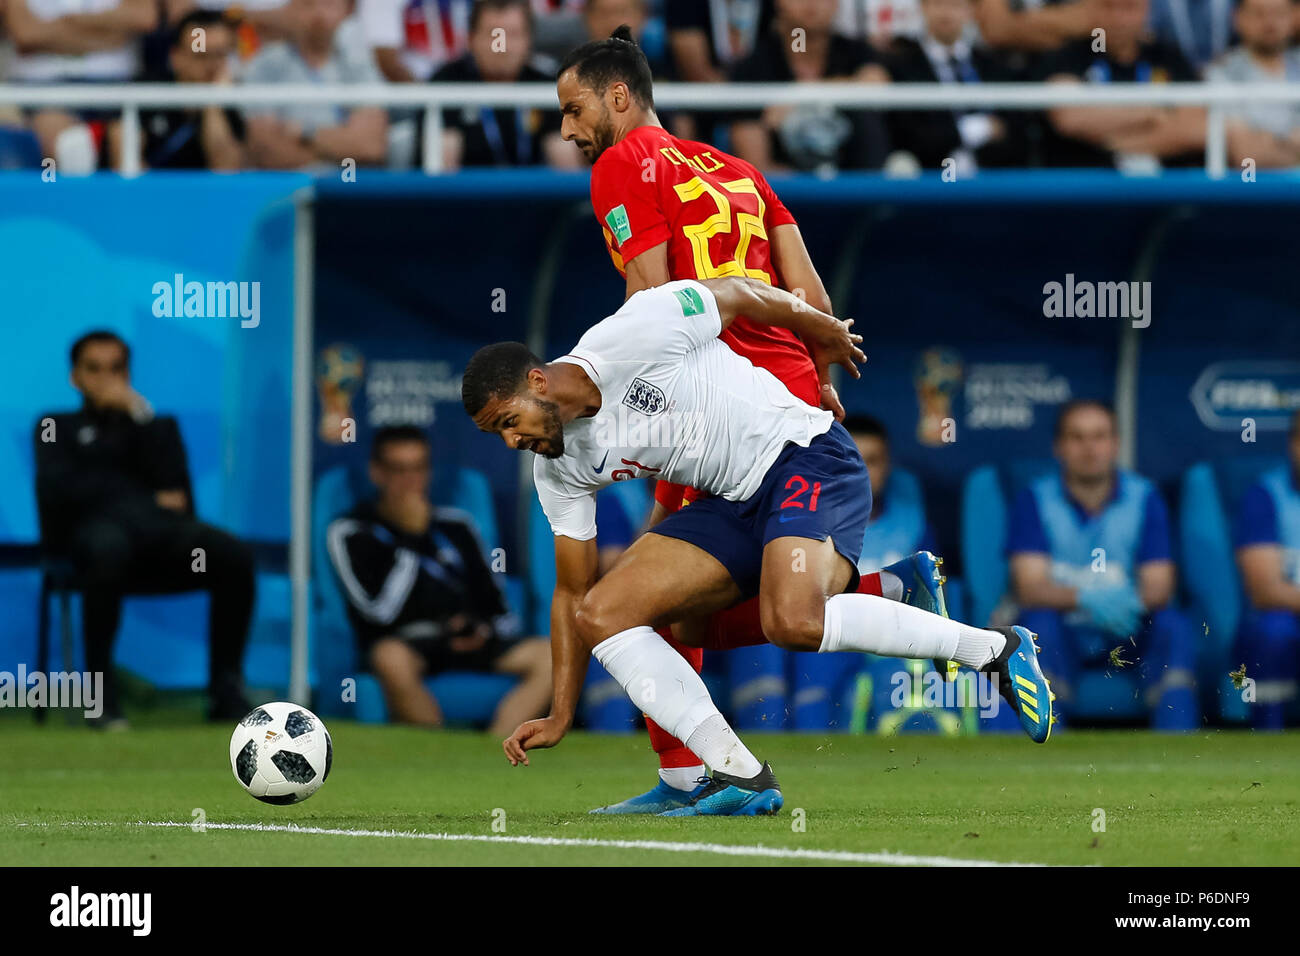 Kaliningrad, Russia. 28th June, 2018. Ruben Loftus-Cheek of England and Nacer Chadli of Belgium during the 2018 FIFA World Cup Group G match between England and Belgium at Kaliningrad Stadium on June 28th 2018 in Kaliningrad, Russia. (Photo by Daniel Chesterton/) Credit: PHC Images/Alamy Live News Stock Photo